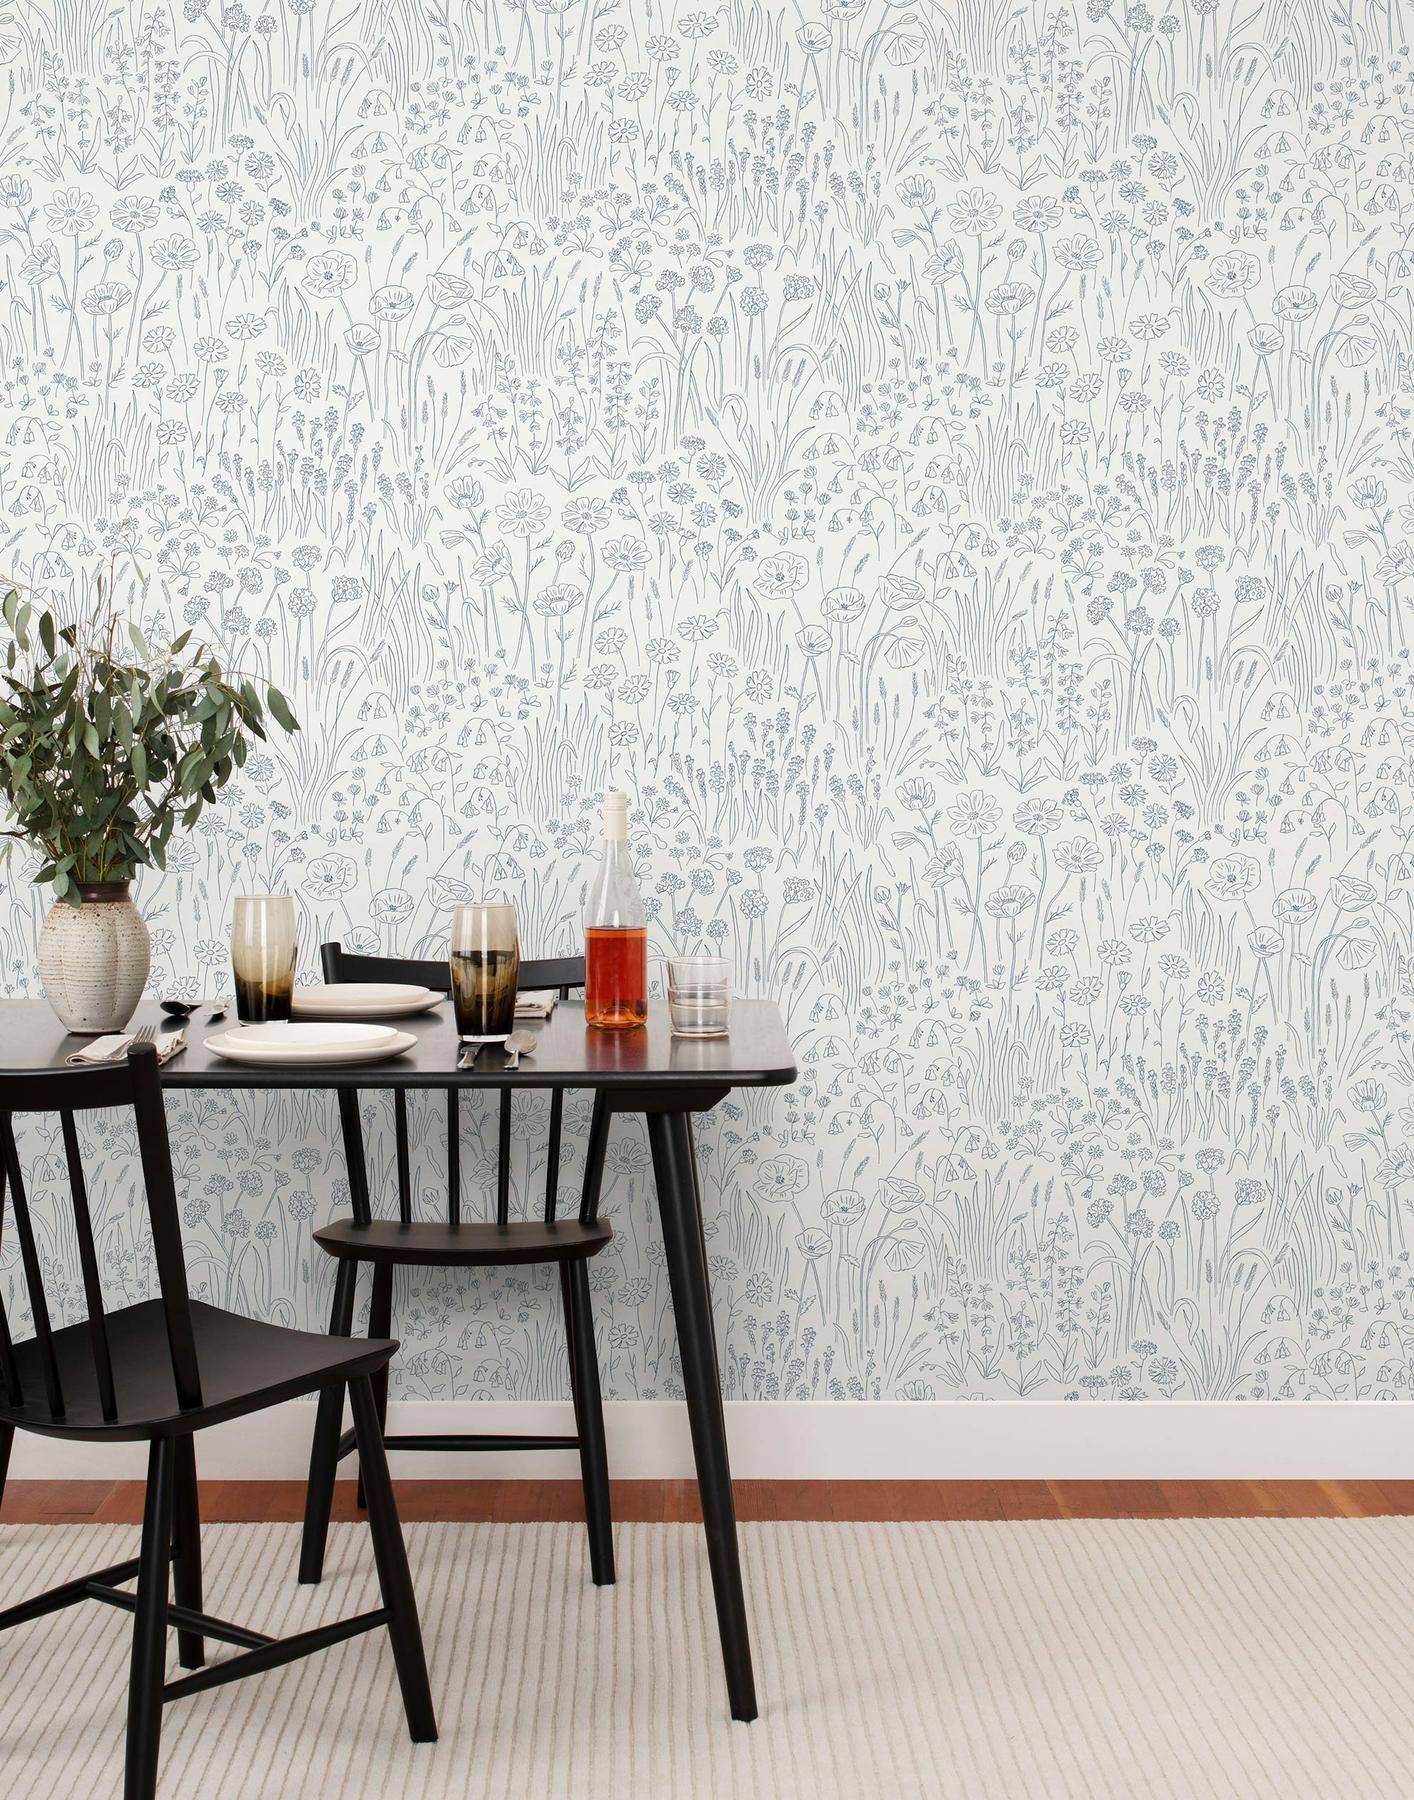 Alpine Garden Tonal Wallpaper from Hygge and West